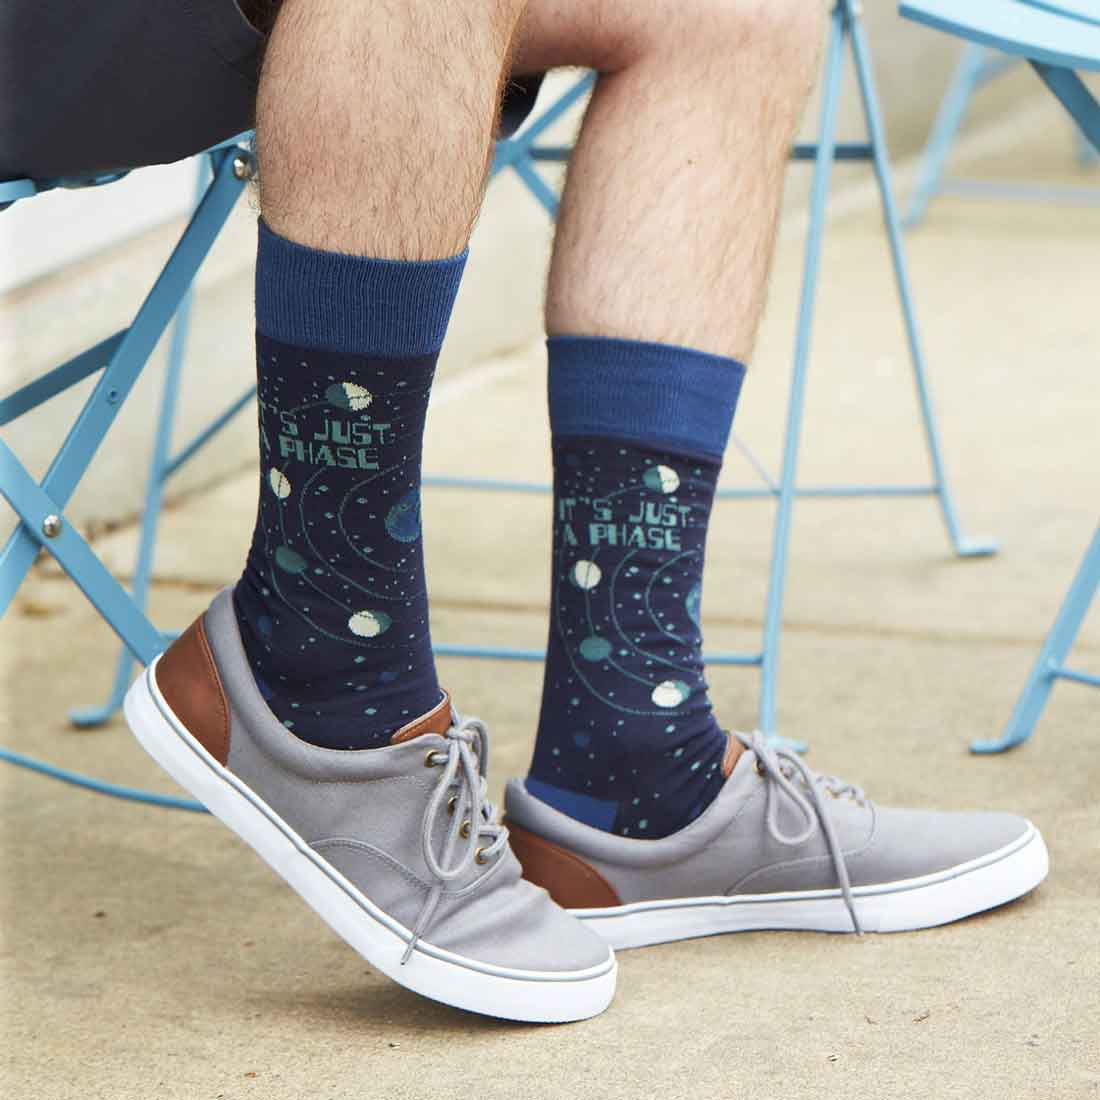 Funny Novelty Just a Phase Socks for Men | Foot Traffic